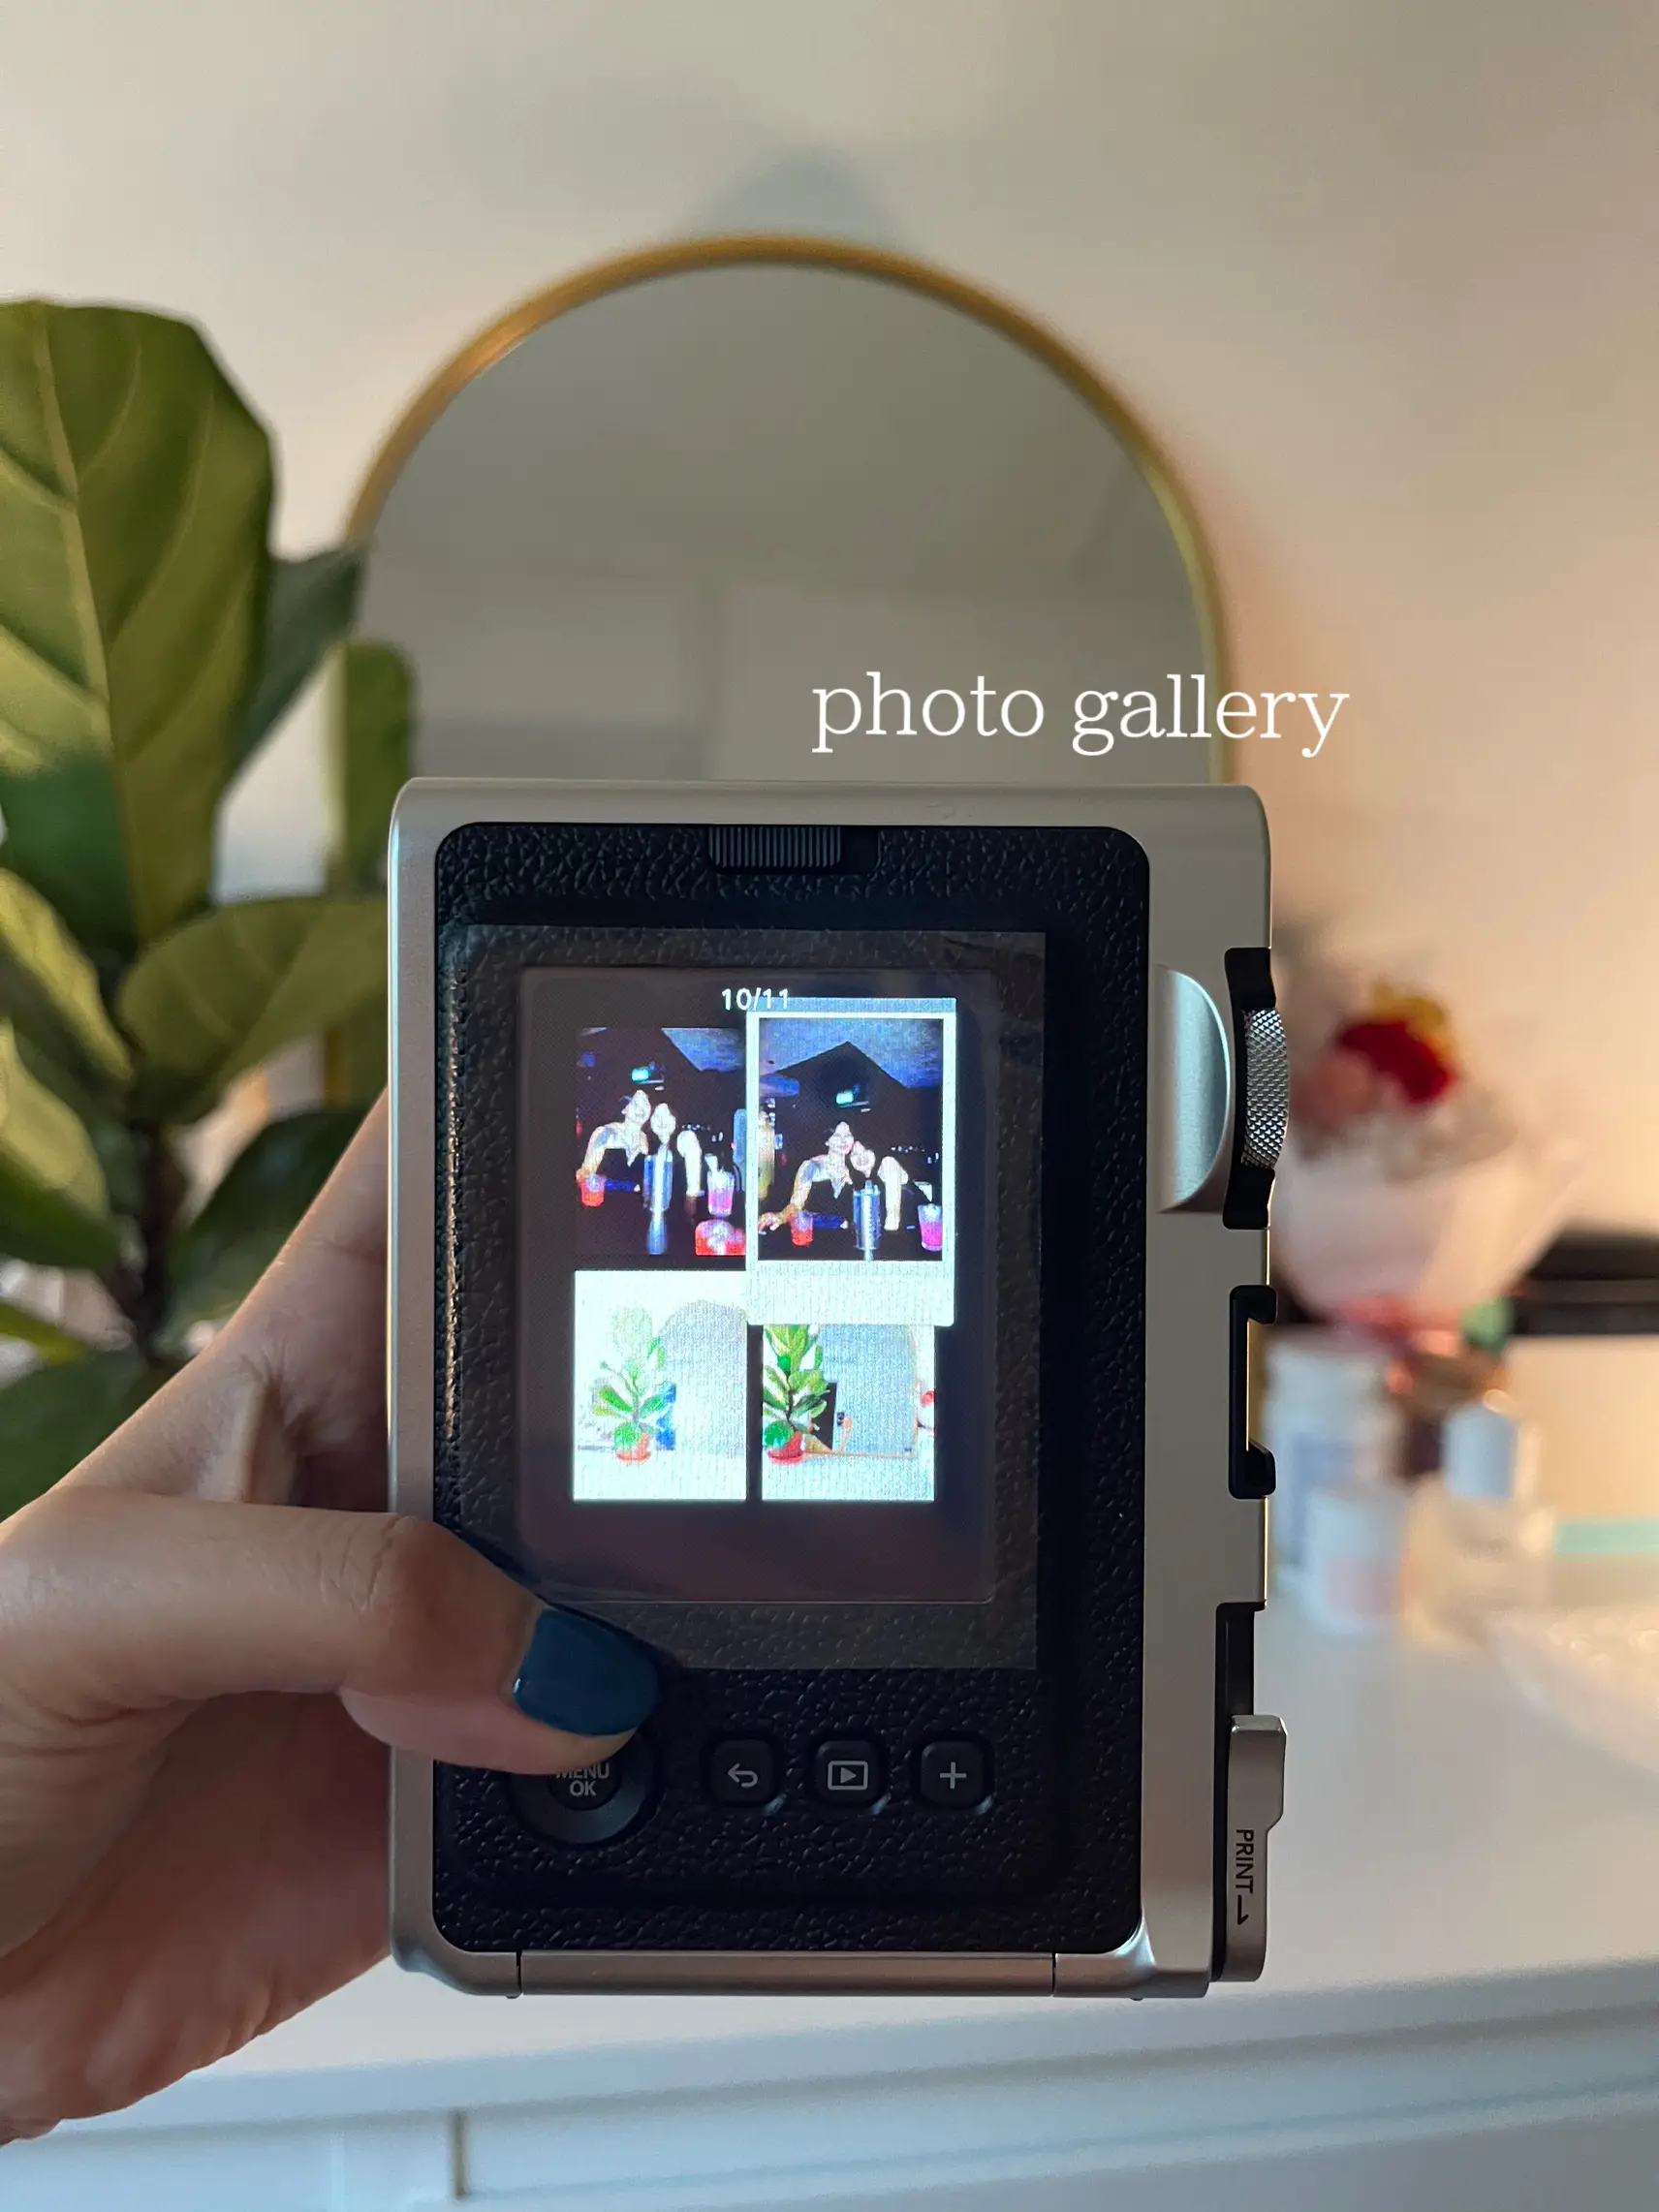 HELP! I just bought my new Instax Mini LipLay, but the printer is